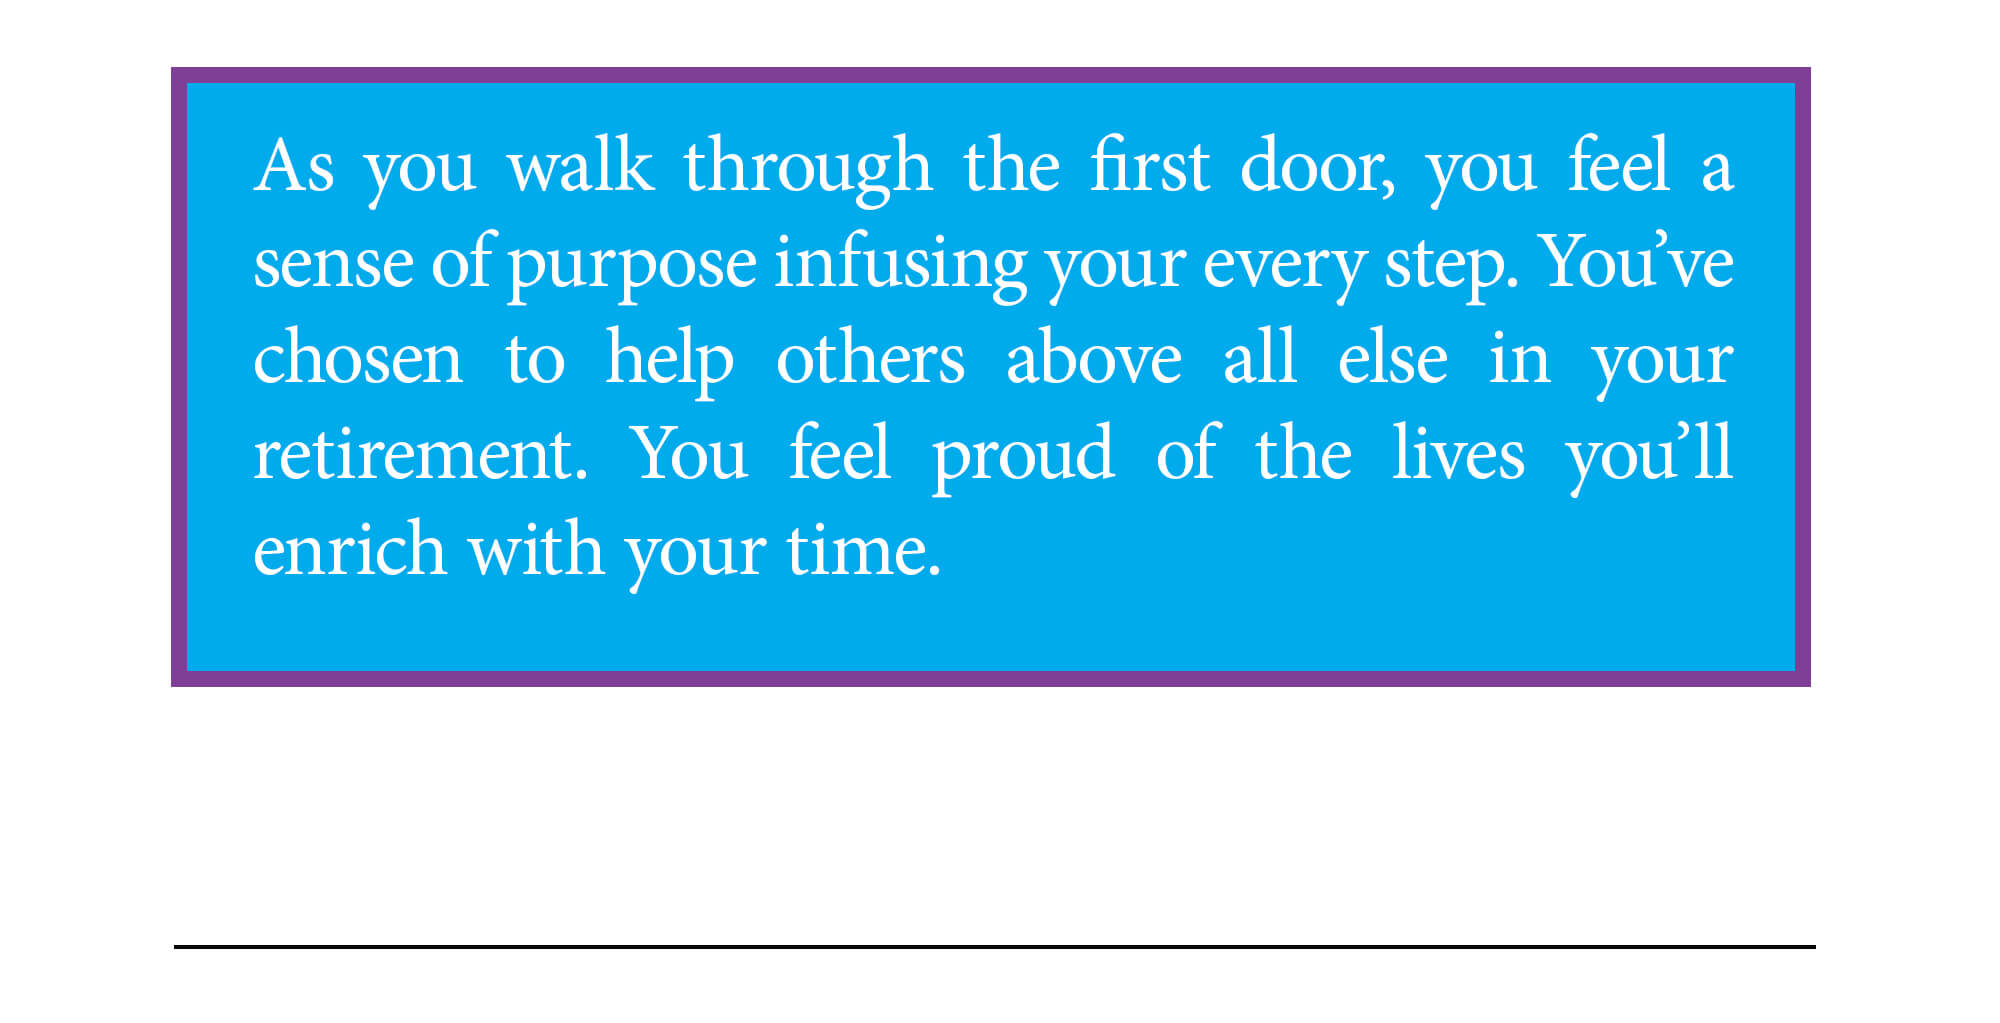 Door 1 ending. As you walk through the first door, you feel a sense of purpose infusing your every step. You've chosen to help others above all else in your retirement. You feel proud of the lives you'll enrich with your time. Continue to ending 2 below.